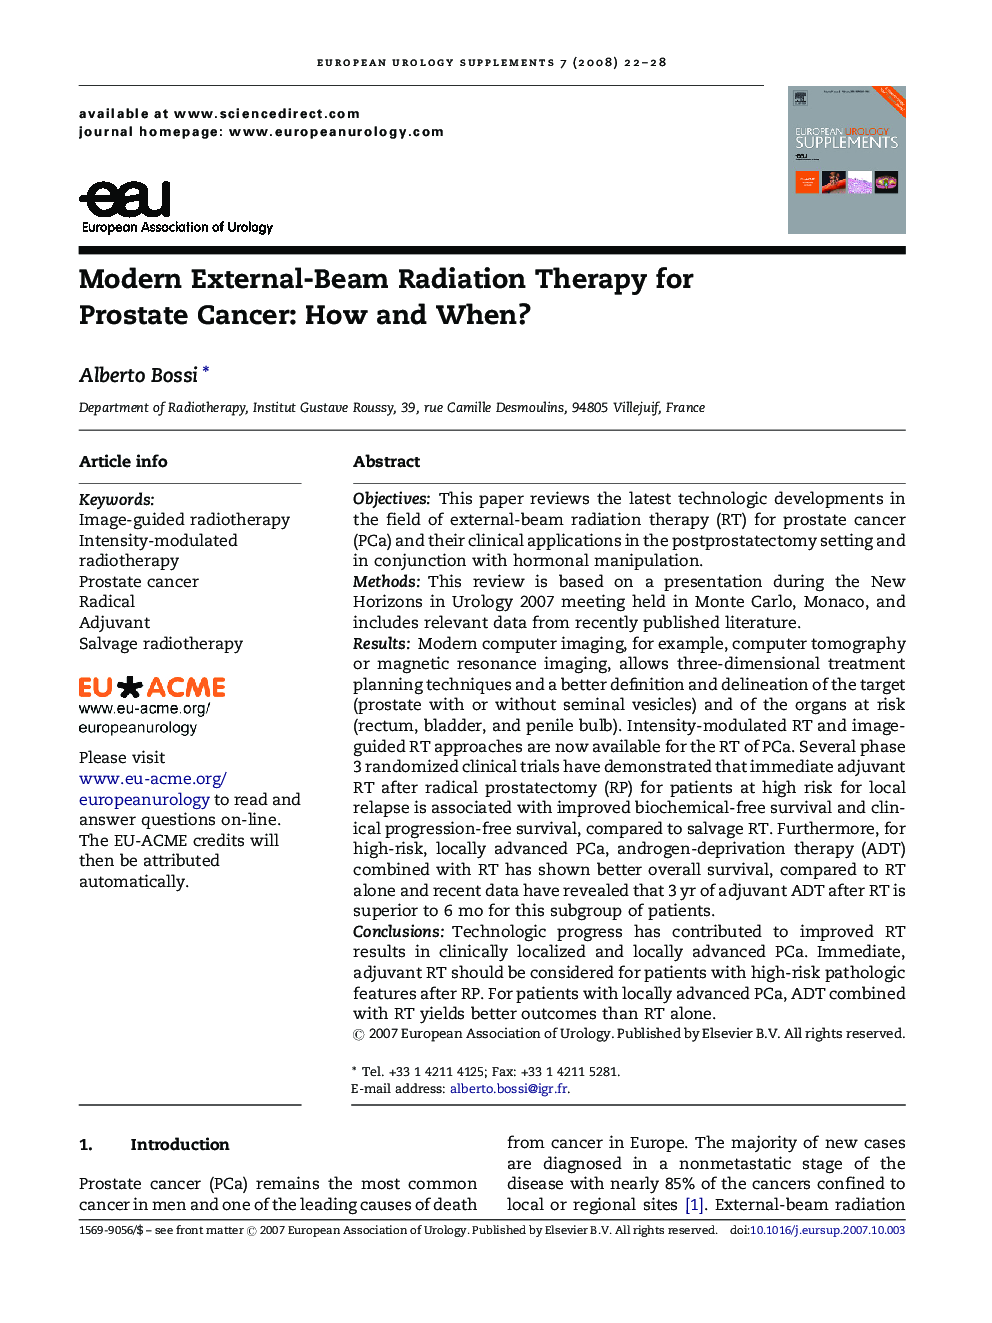 Modern External-Beam Radiation Therapy for Prostate Cancer: How and When? 